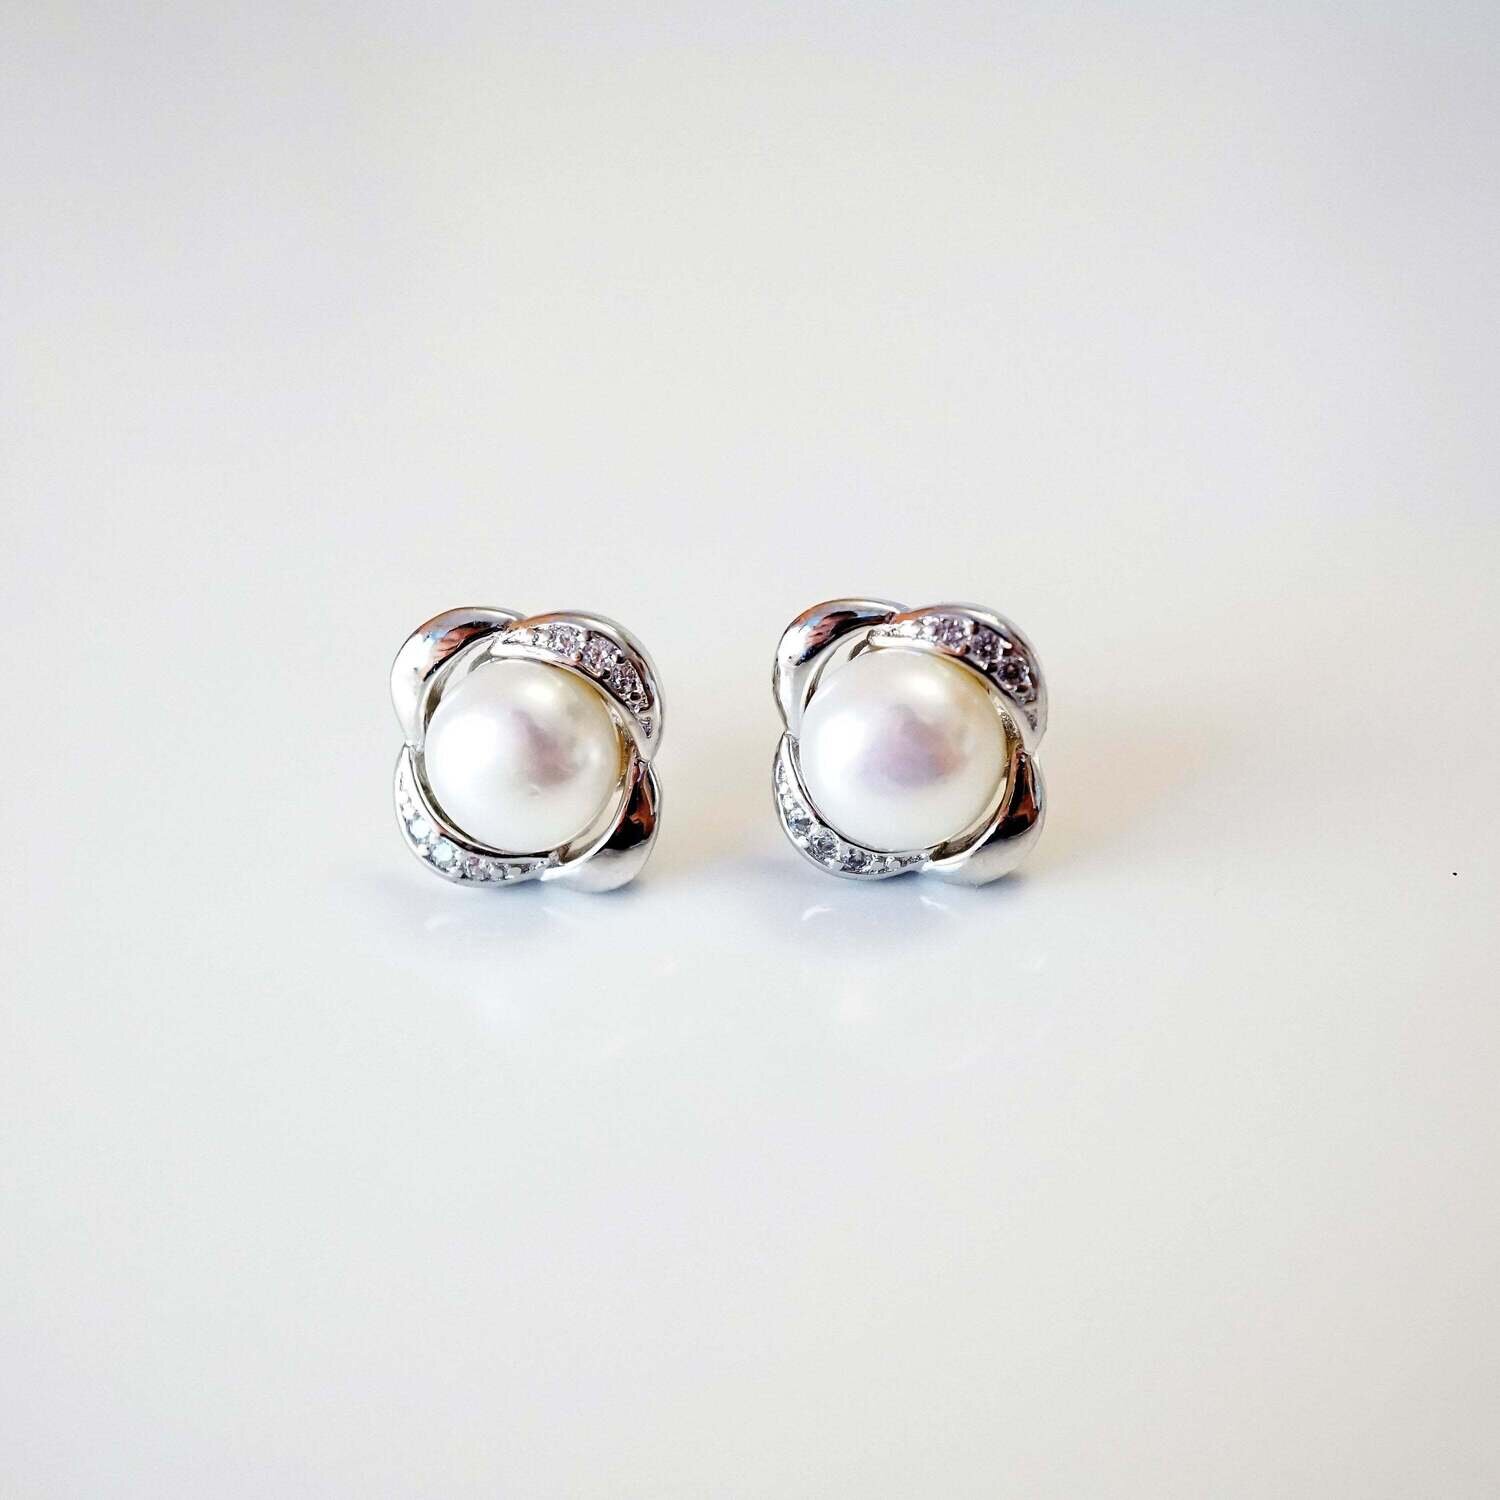 Charlotte X - White Pearl Round Silver Stud Earrings